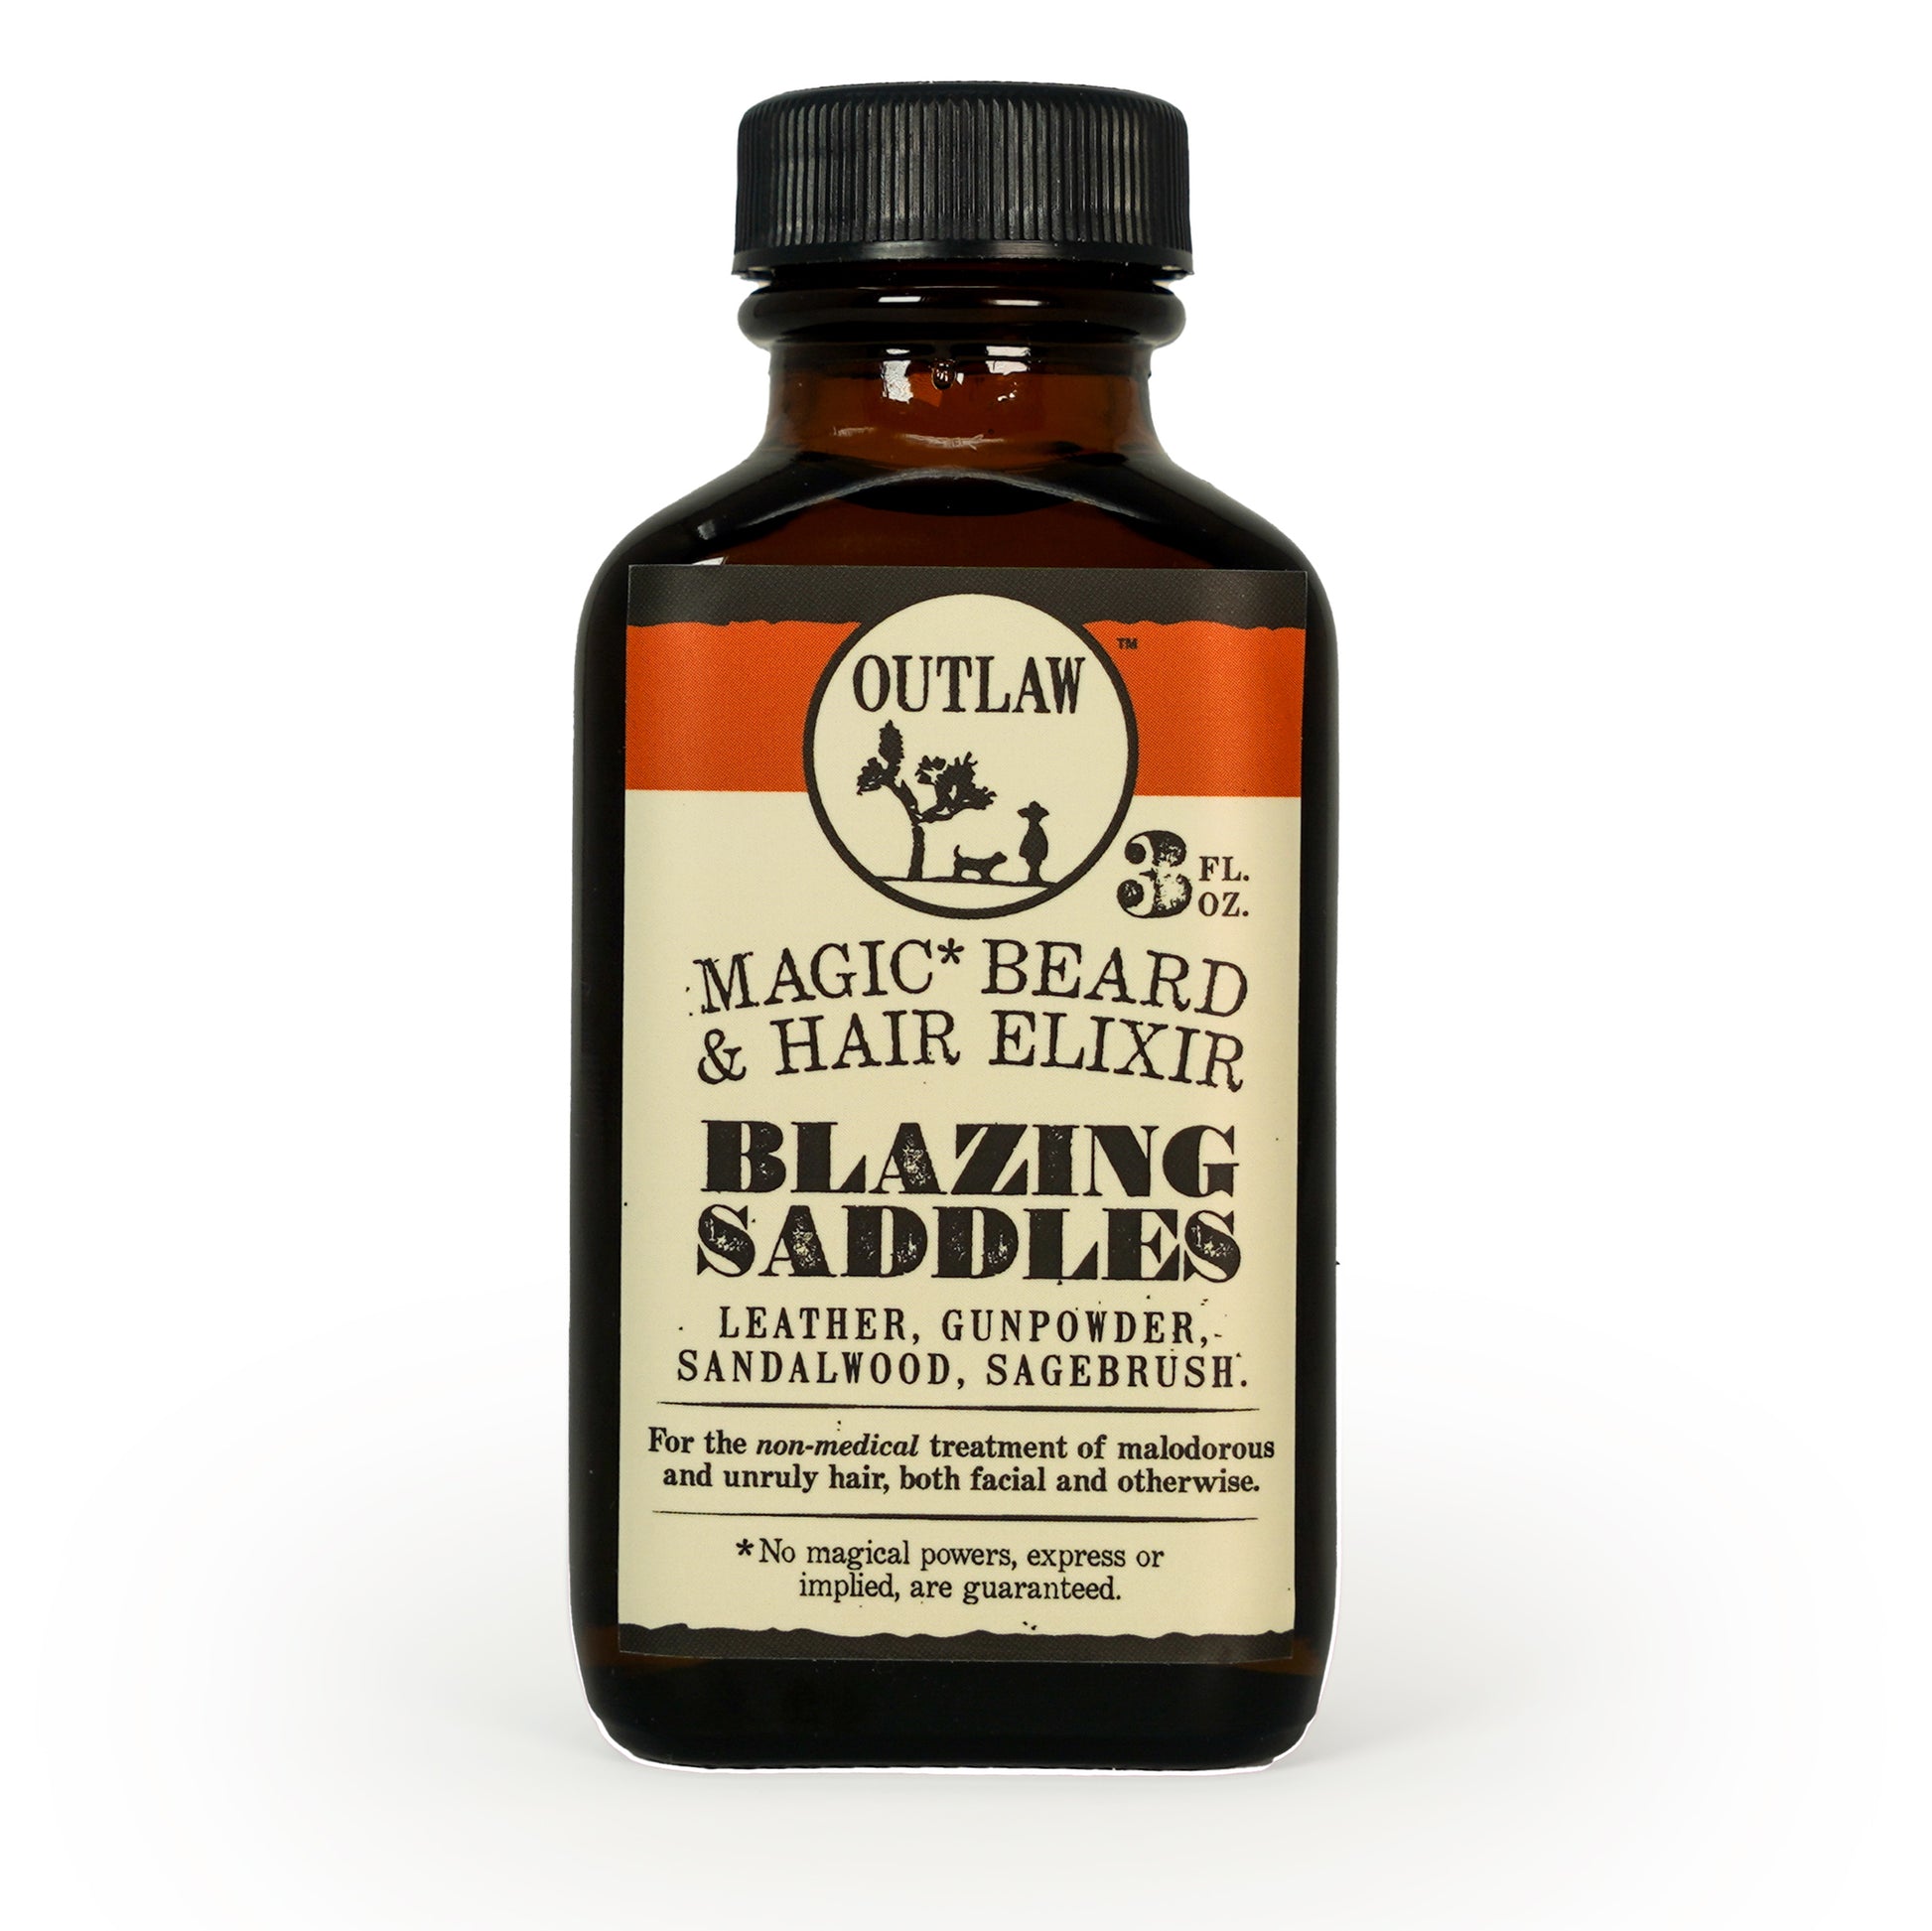 Outlaw beard oil in blazing saddles leather scent